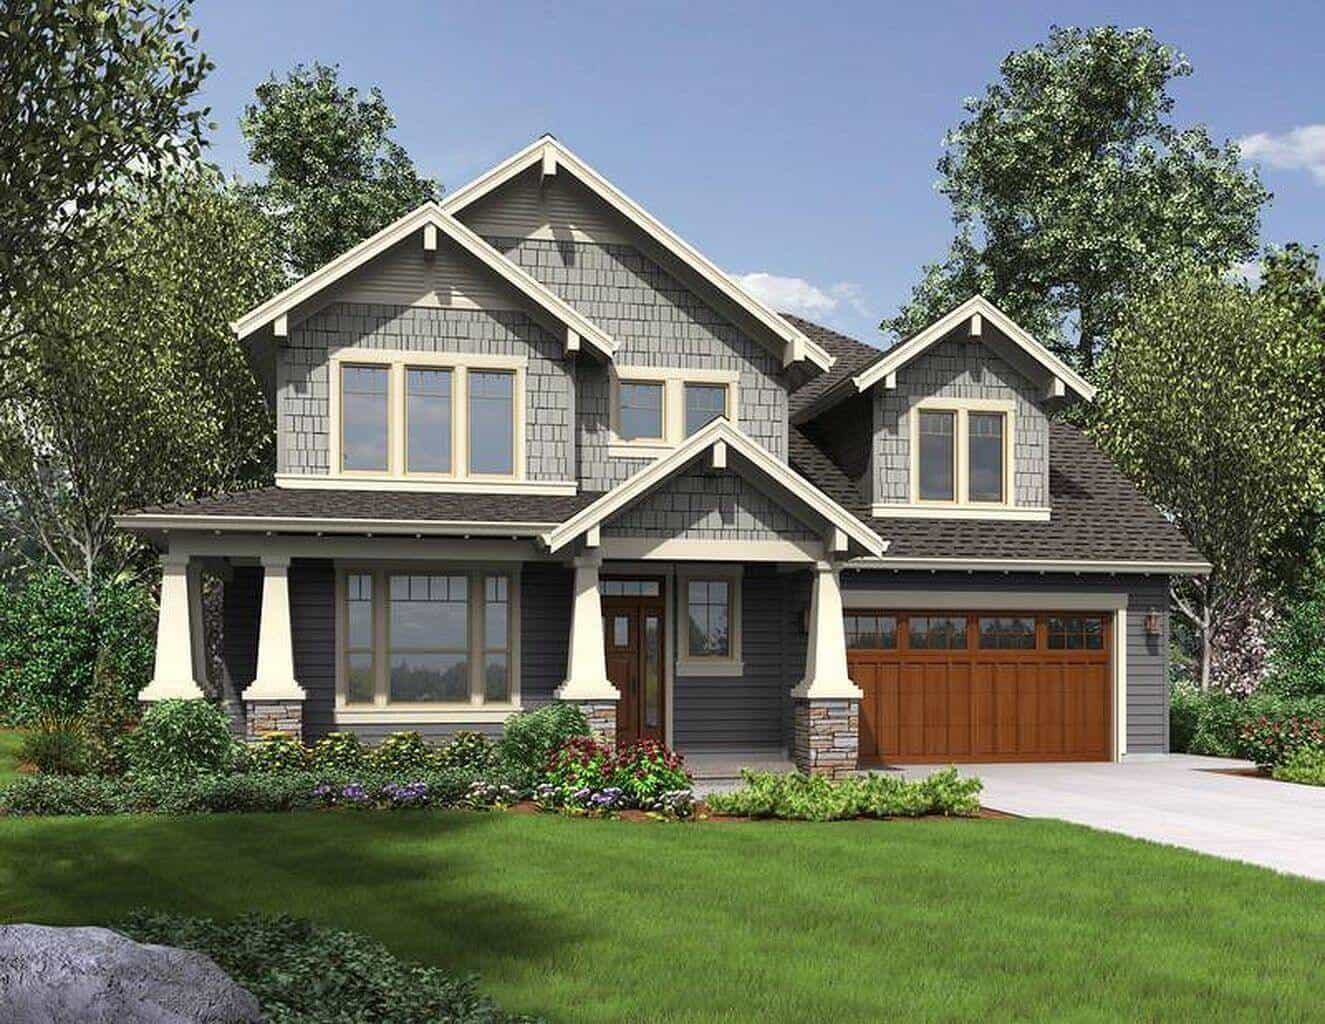 Modern or contemporary Craftsman House Plans - The Architecture Designs